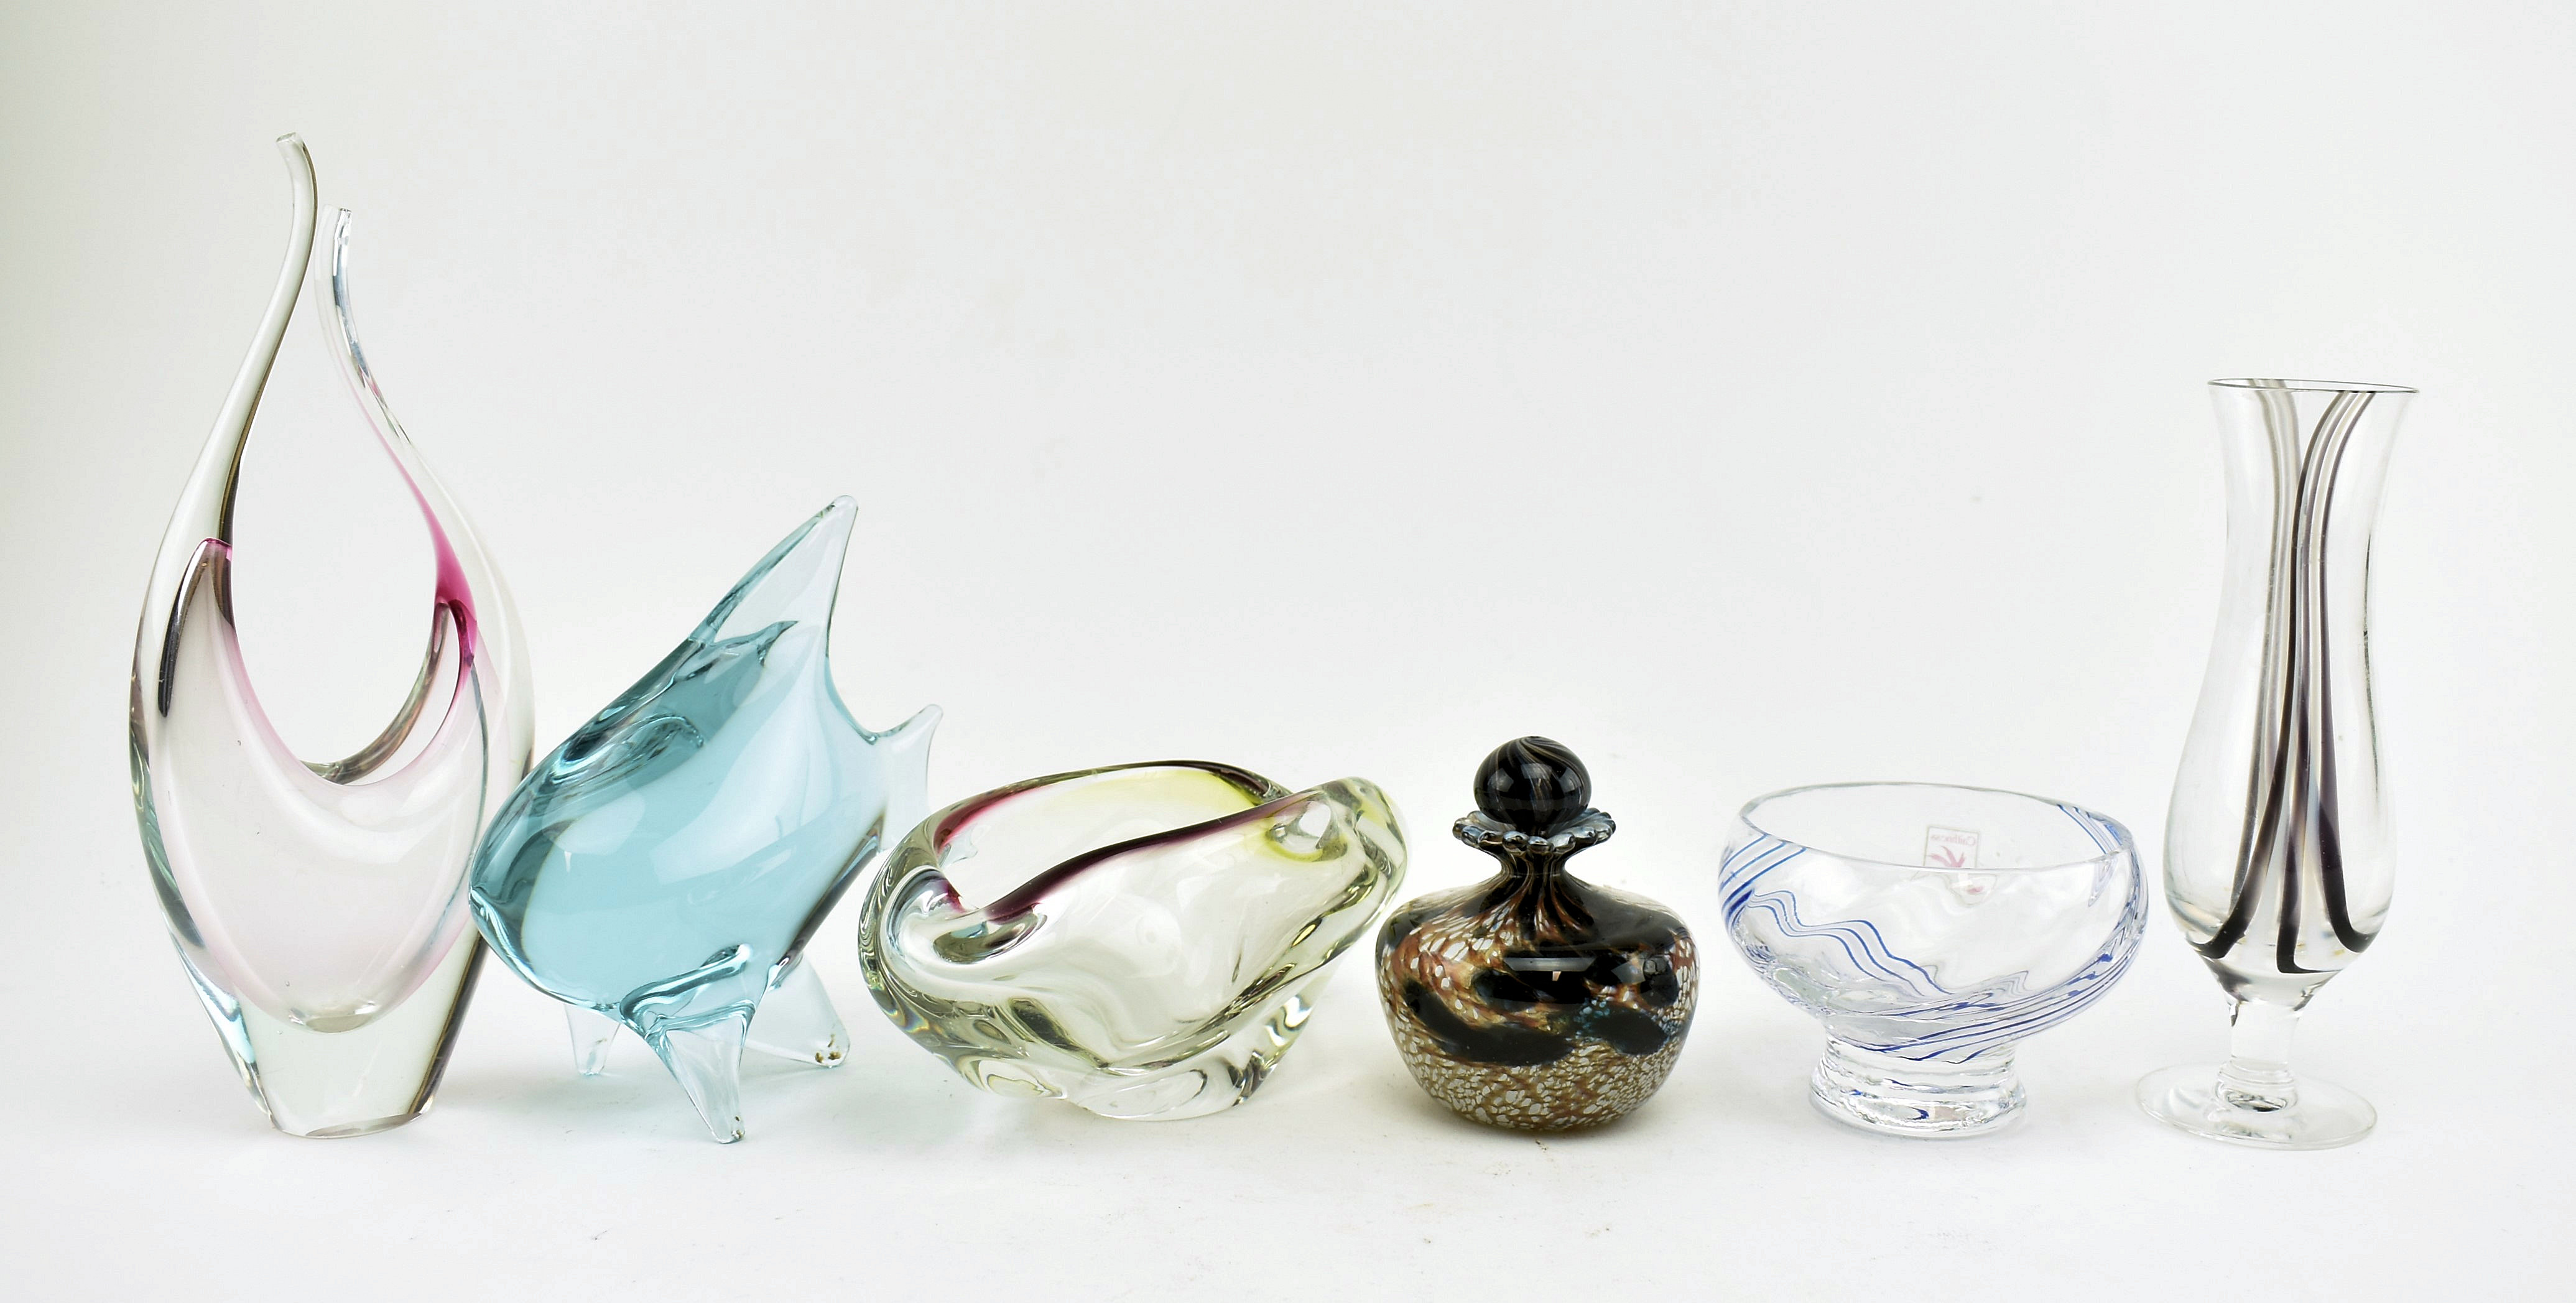 COLLECTION OF SIX 20TH CENTURY GLASS -VASES AND CENTERPIECES